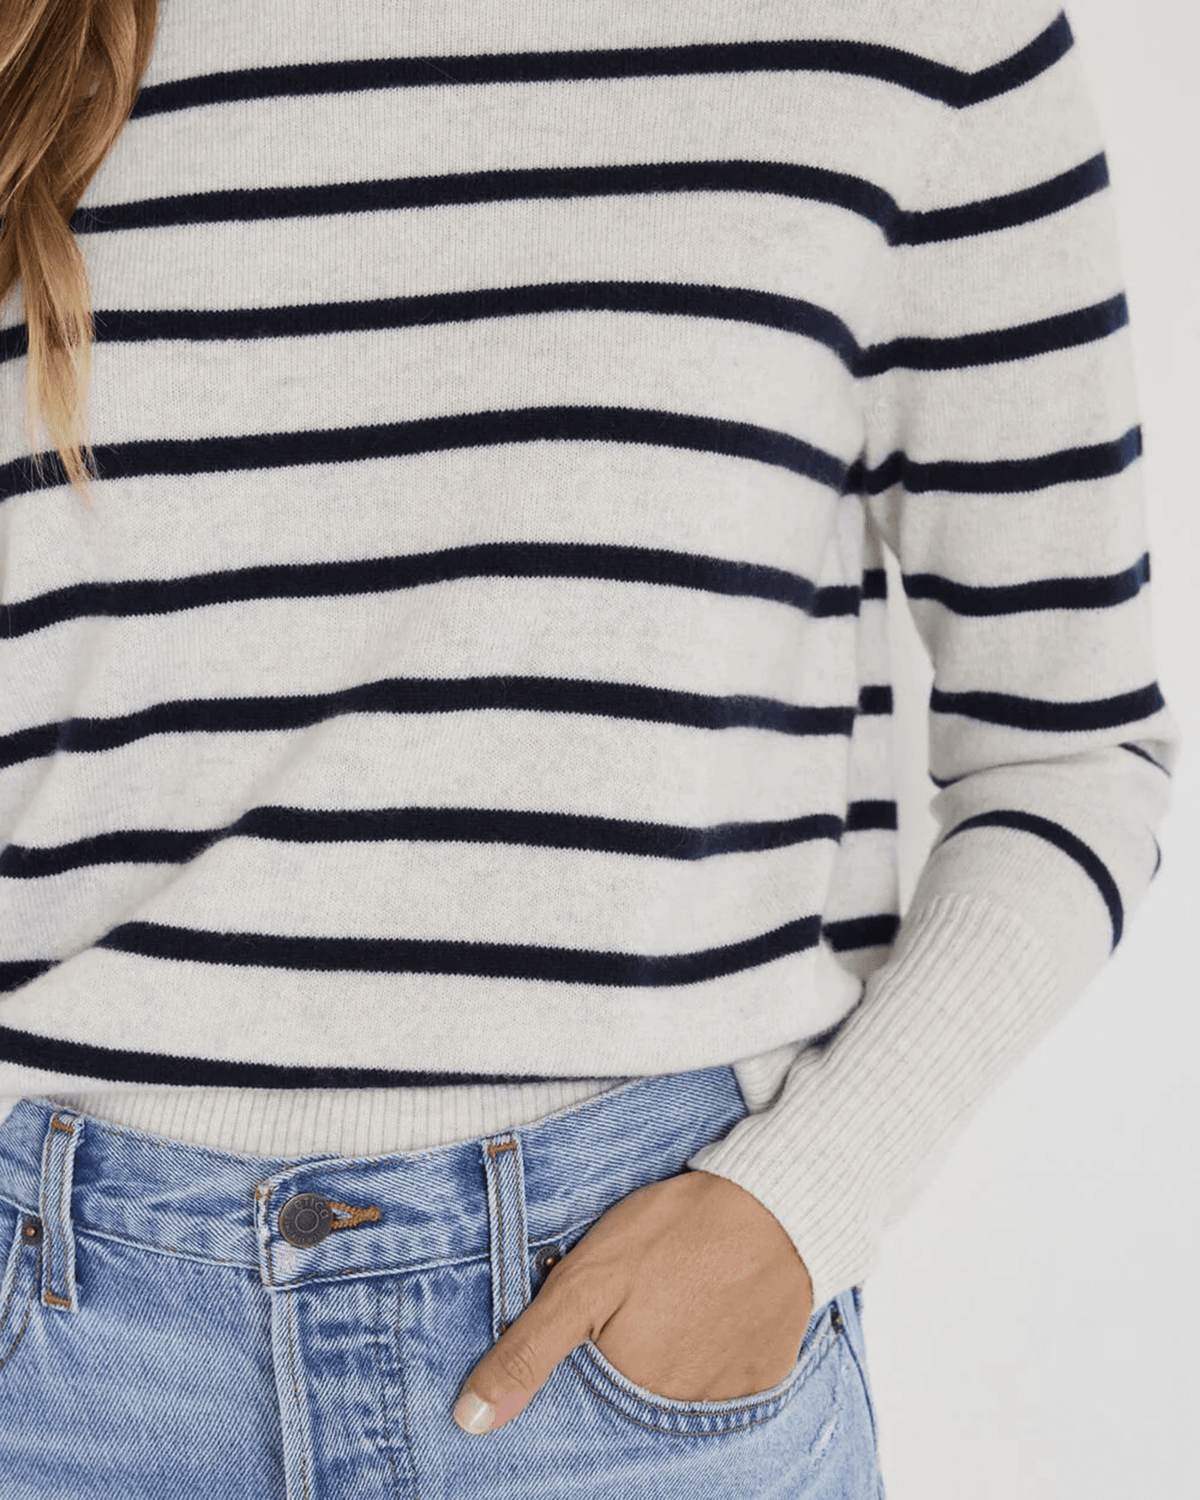 Not Monday Clothing Asher Cashmere Crewneck in Light Grey & Navy Stripes